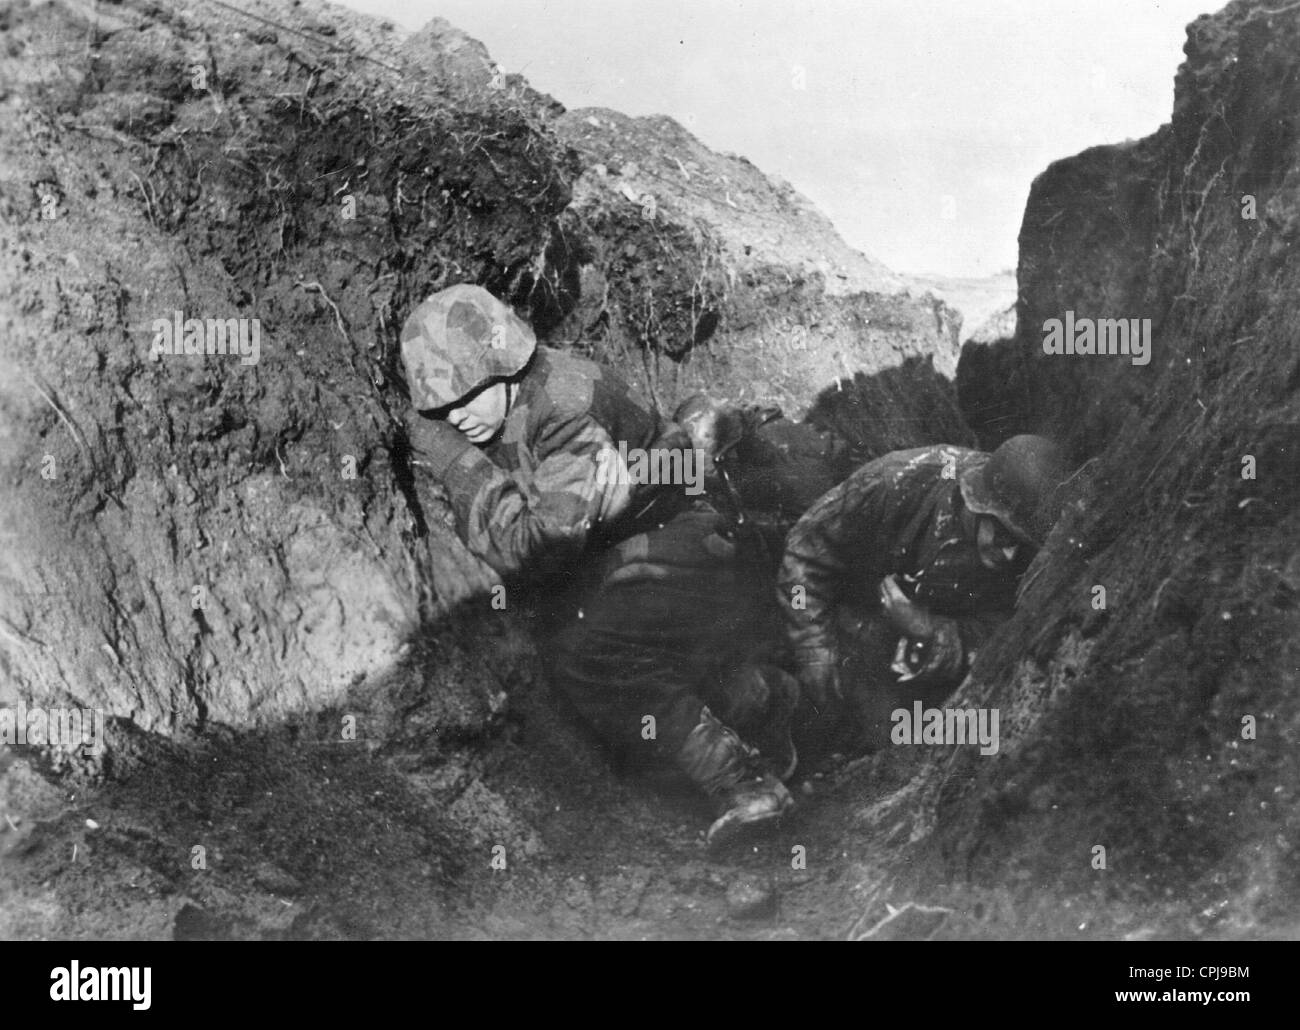 German soldiers on the Eastern front, 1945 Stock Photo